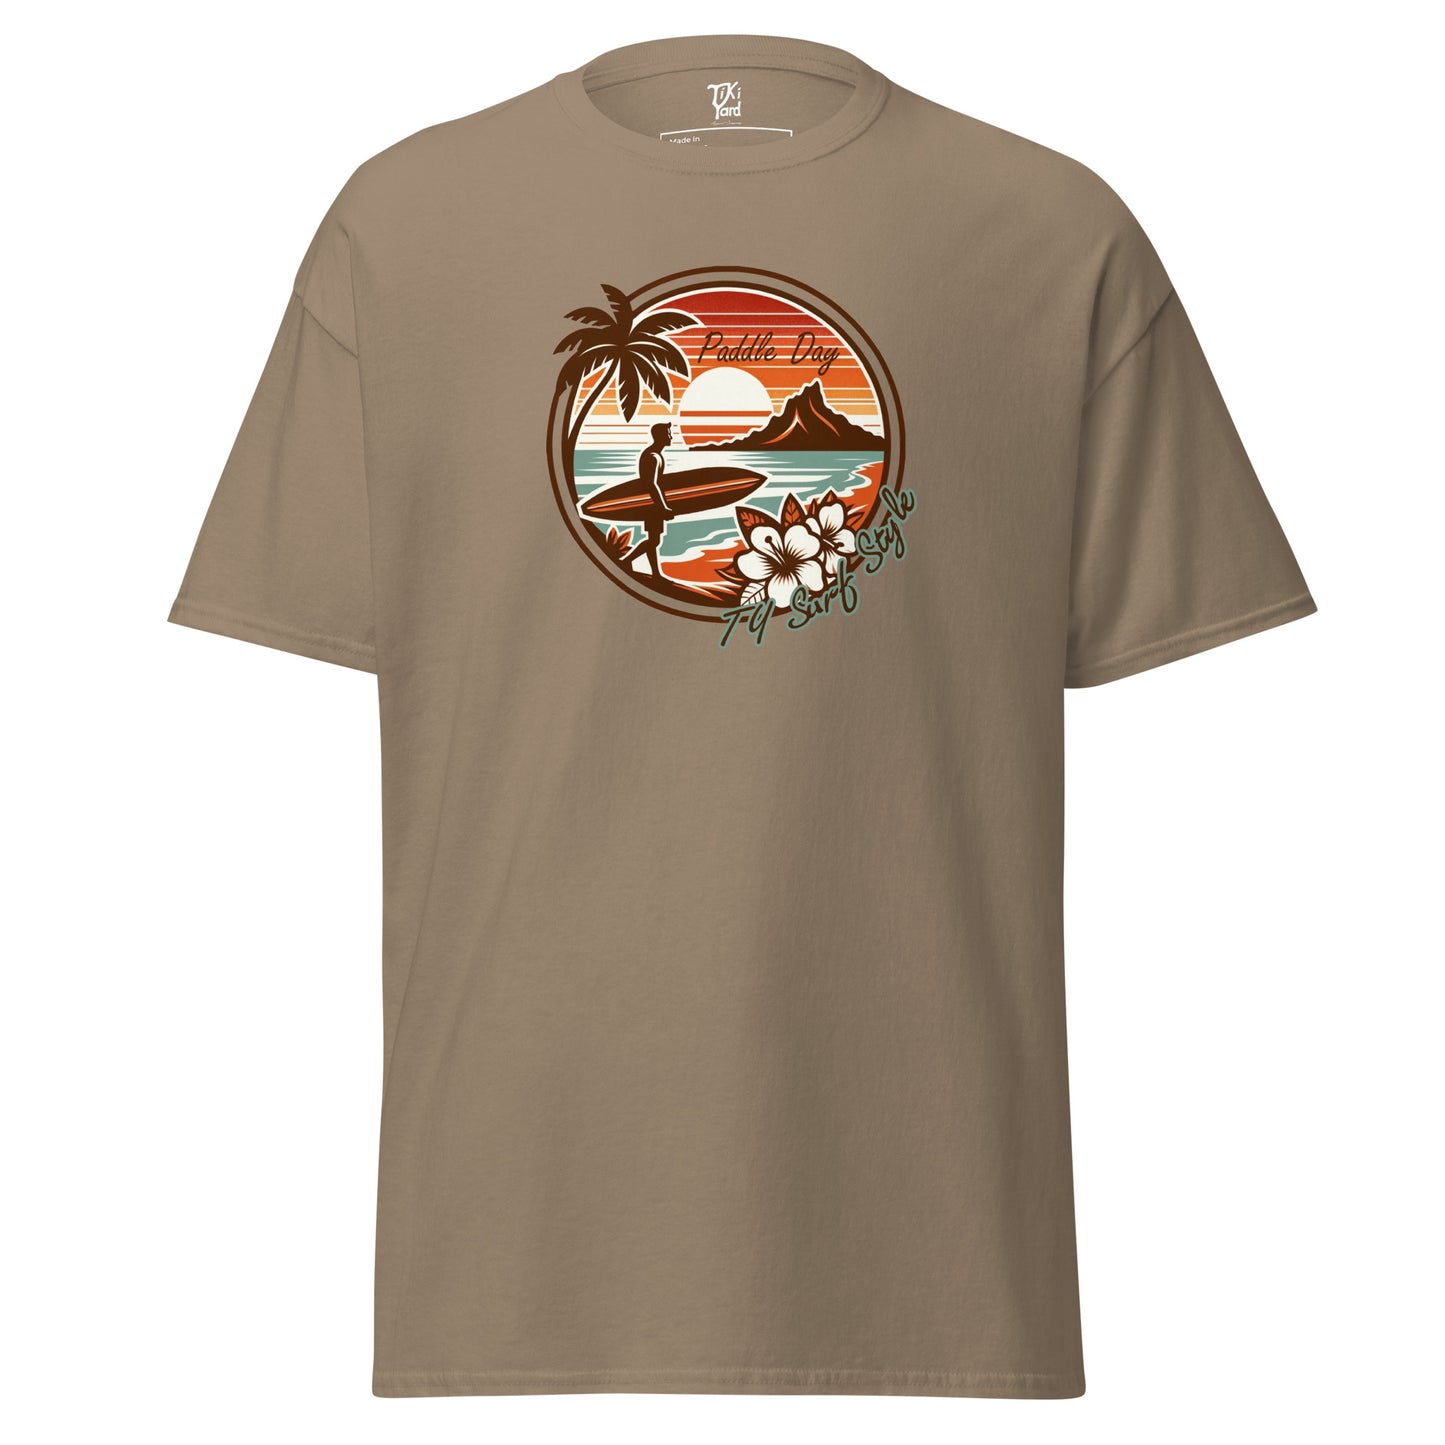 Paddle Day - Men's T-Shirt